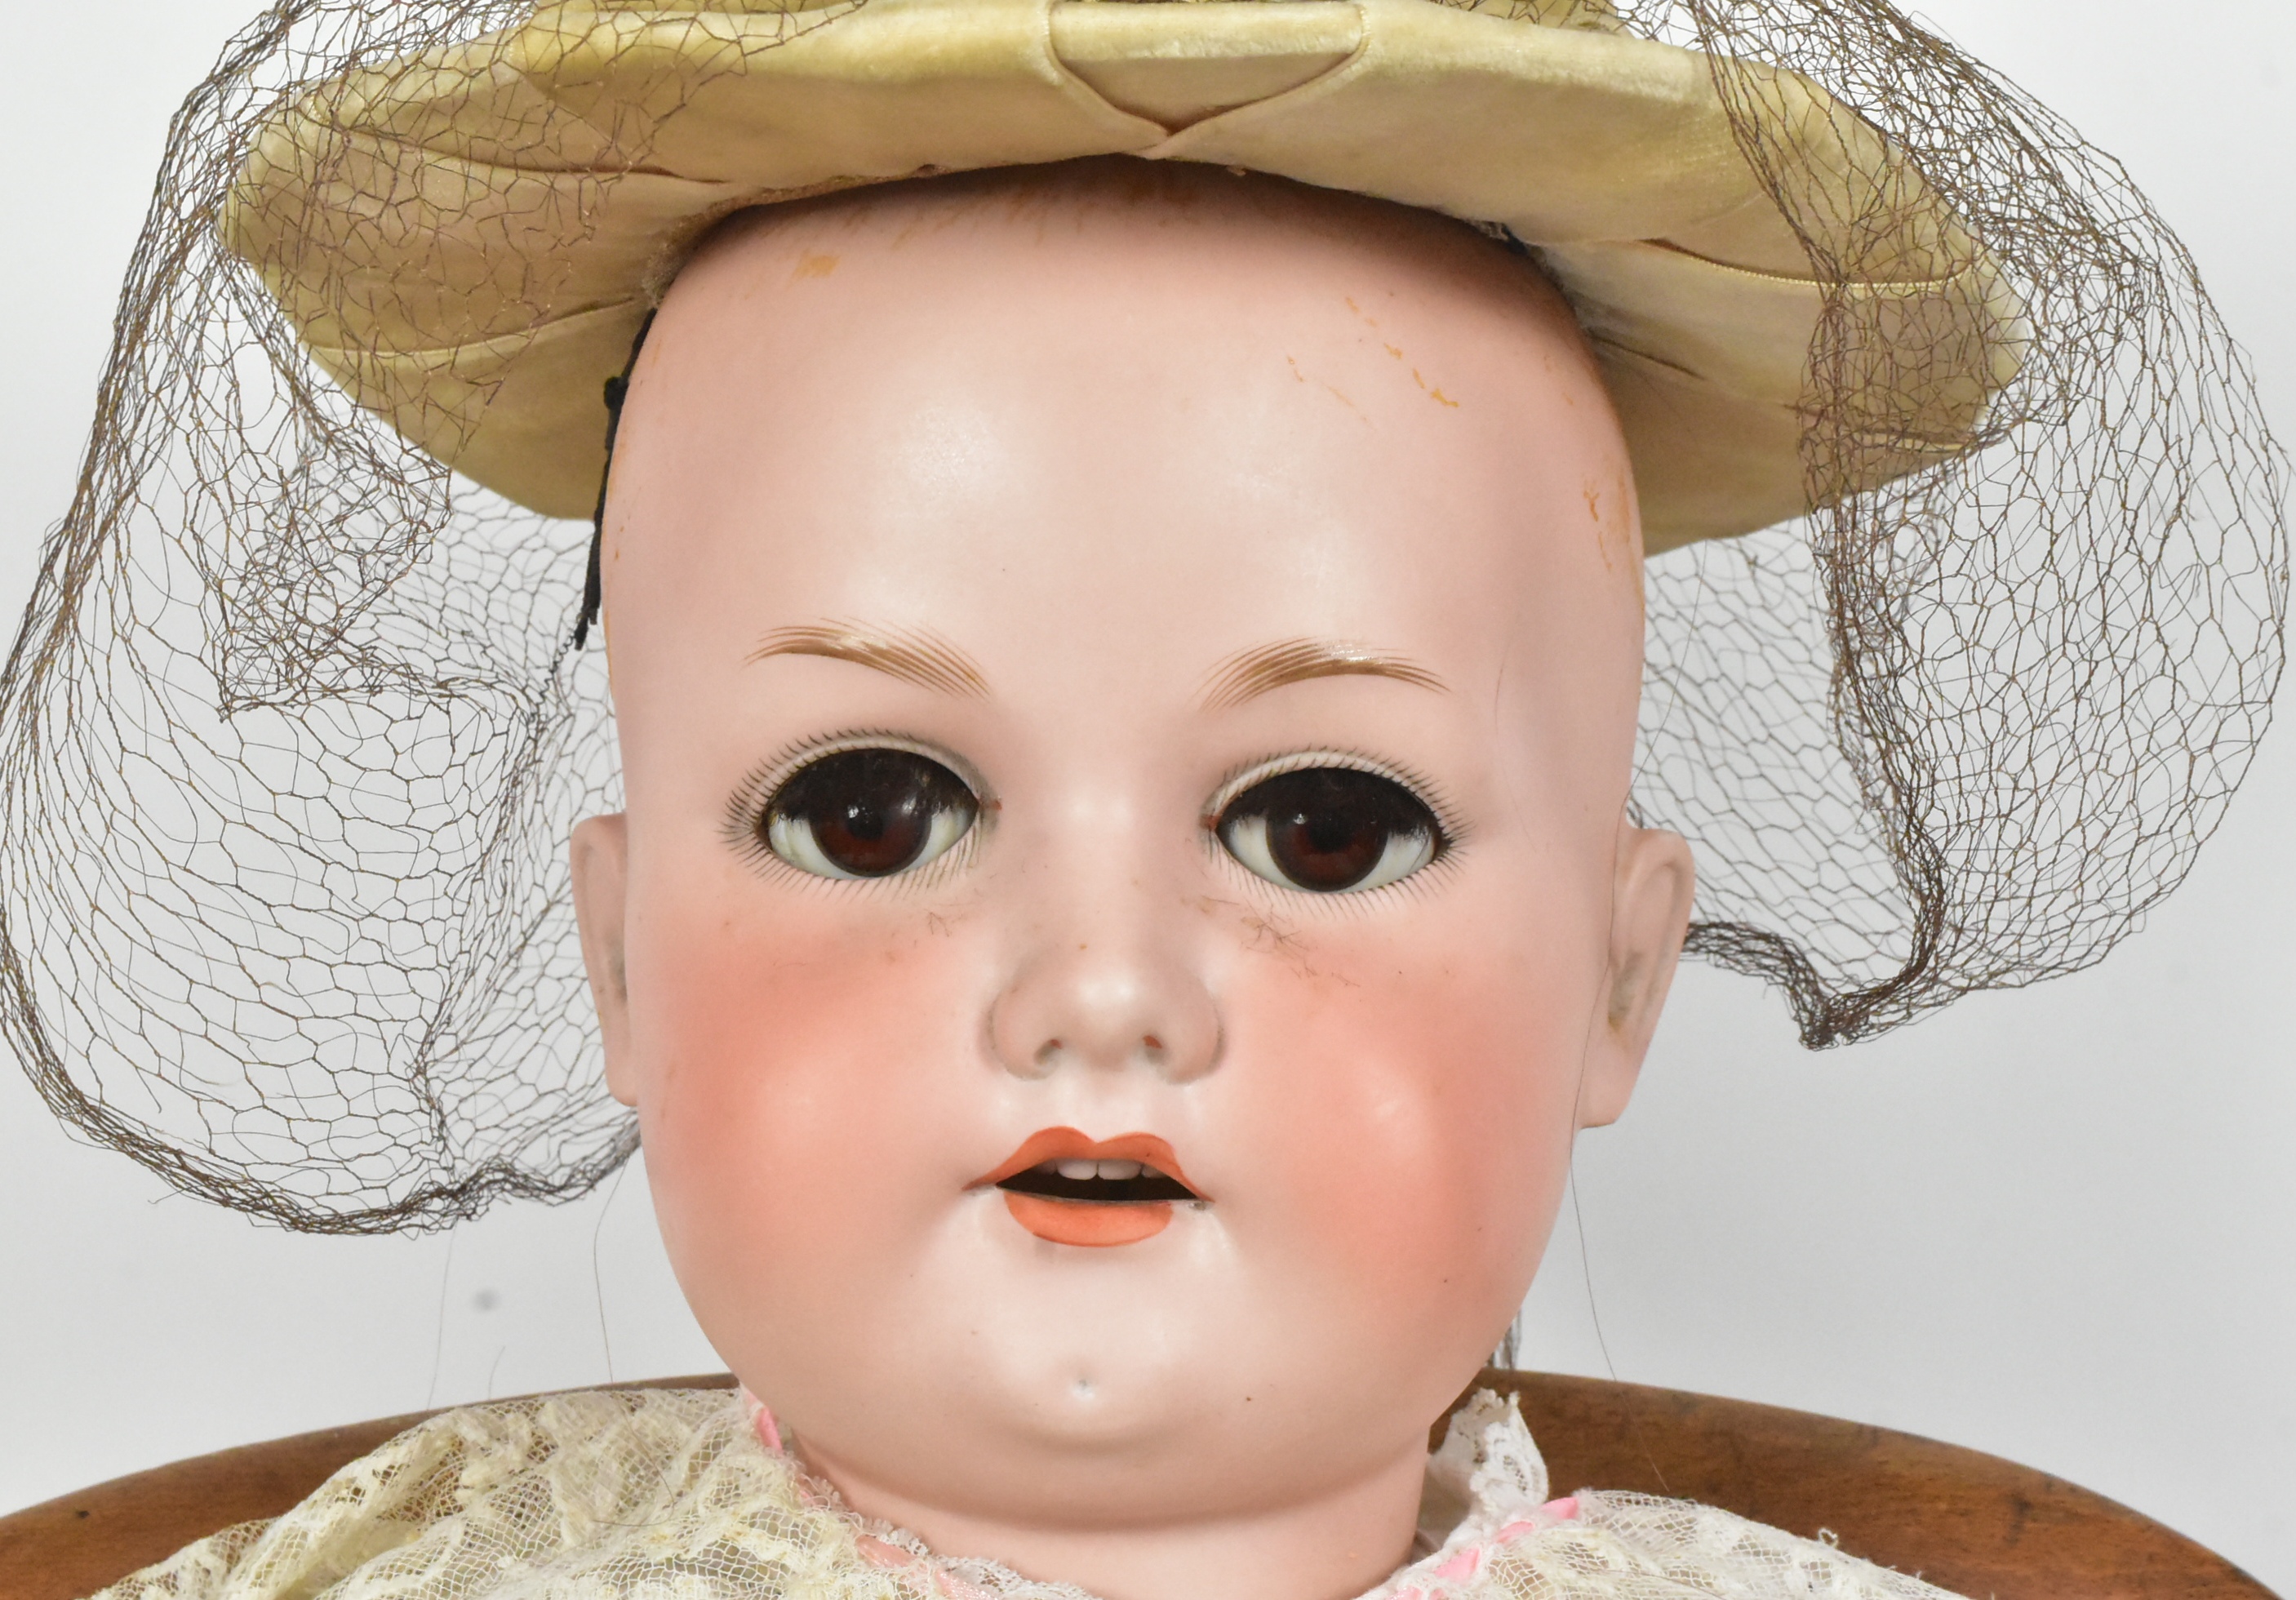 DOLLS - LARGE ARMAND MARSEILLE BISQUE HEADED DOLL - Image 2 of 6